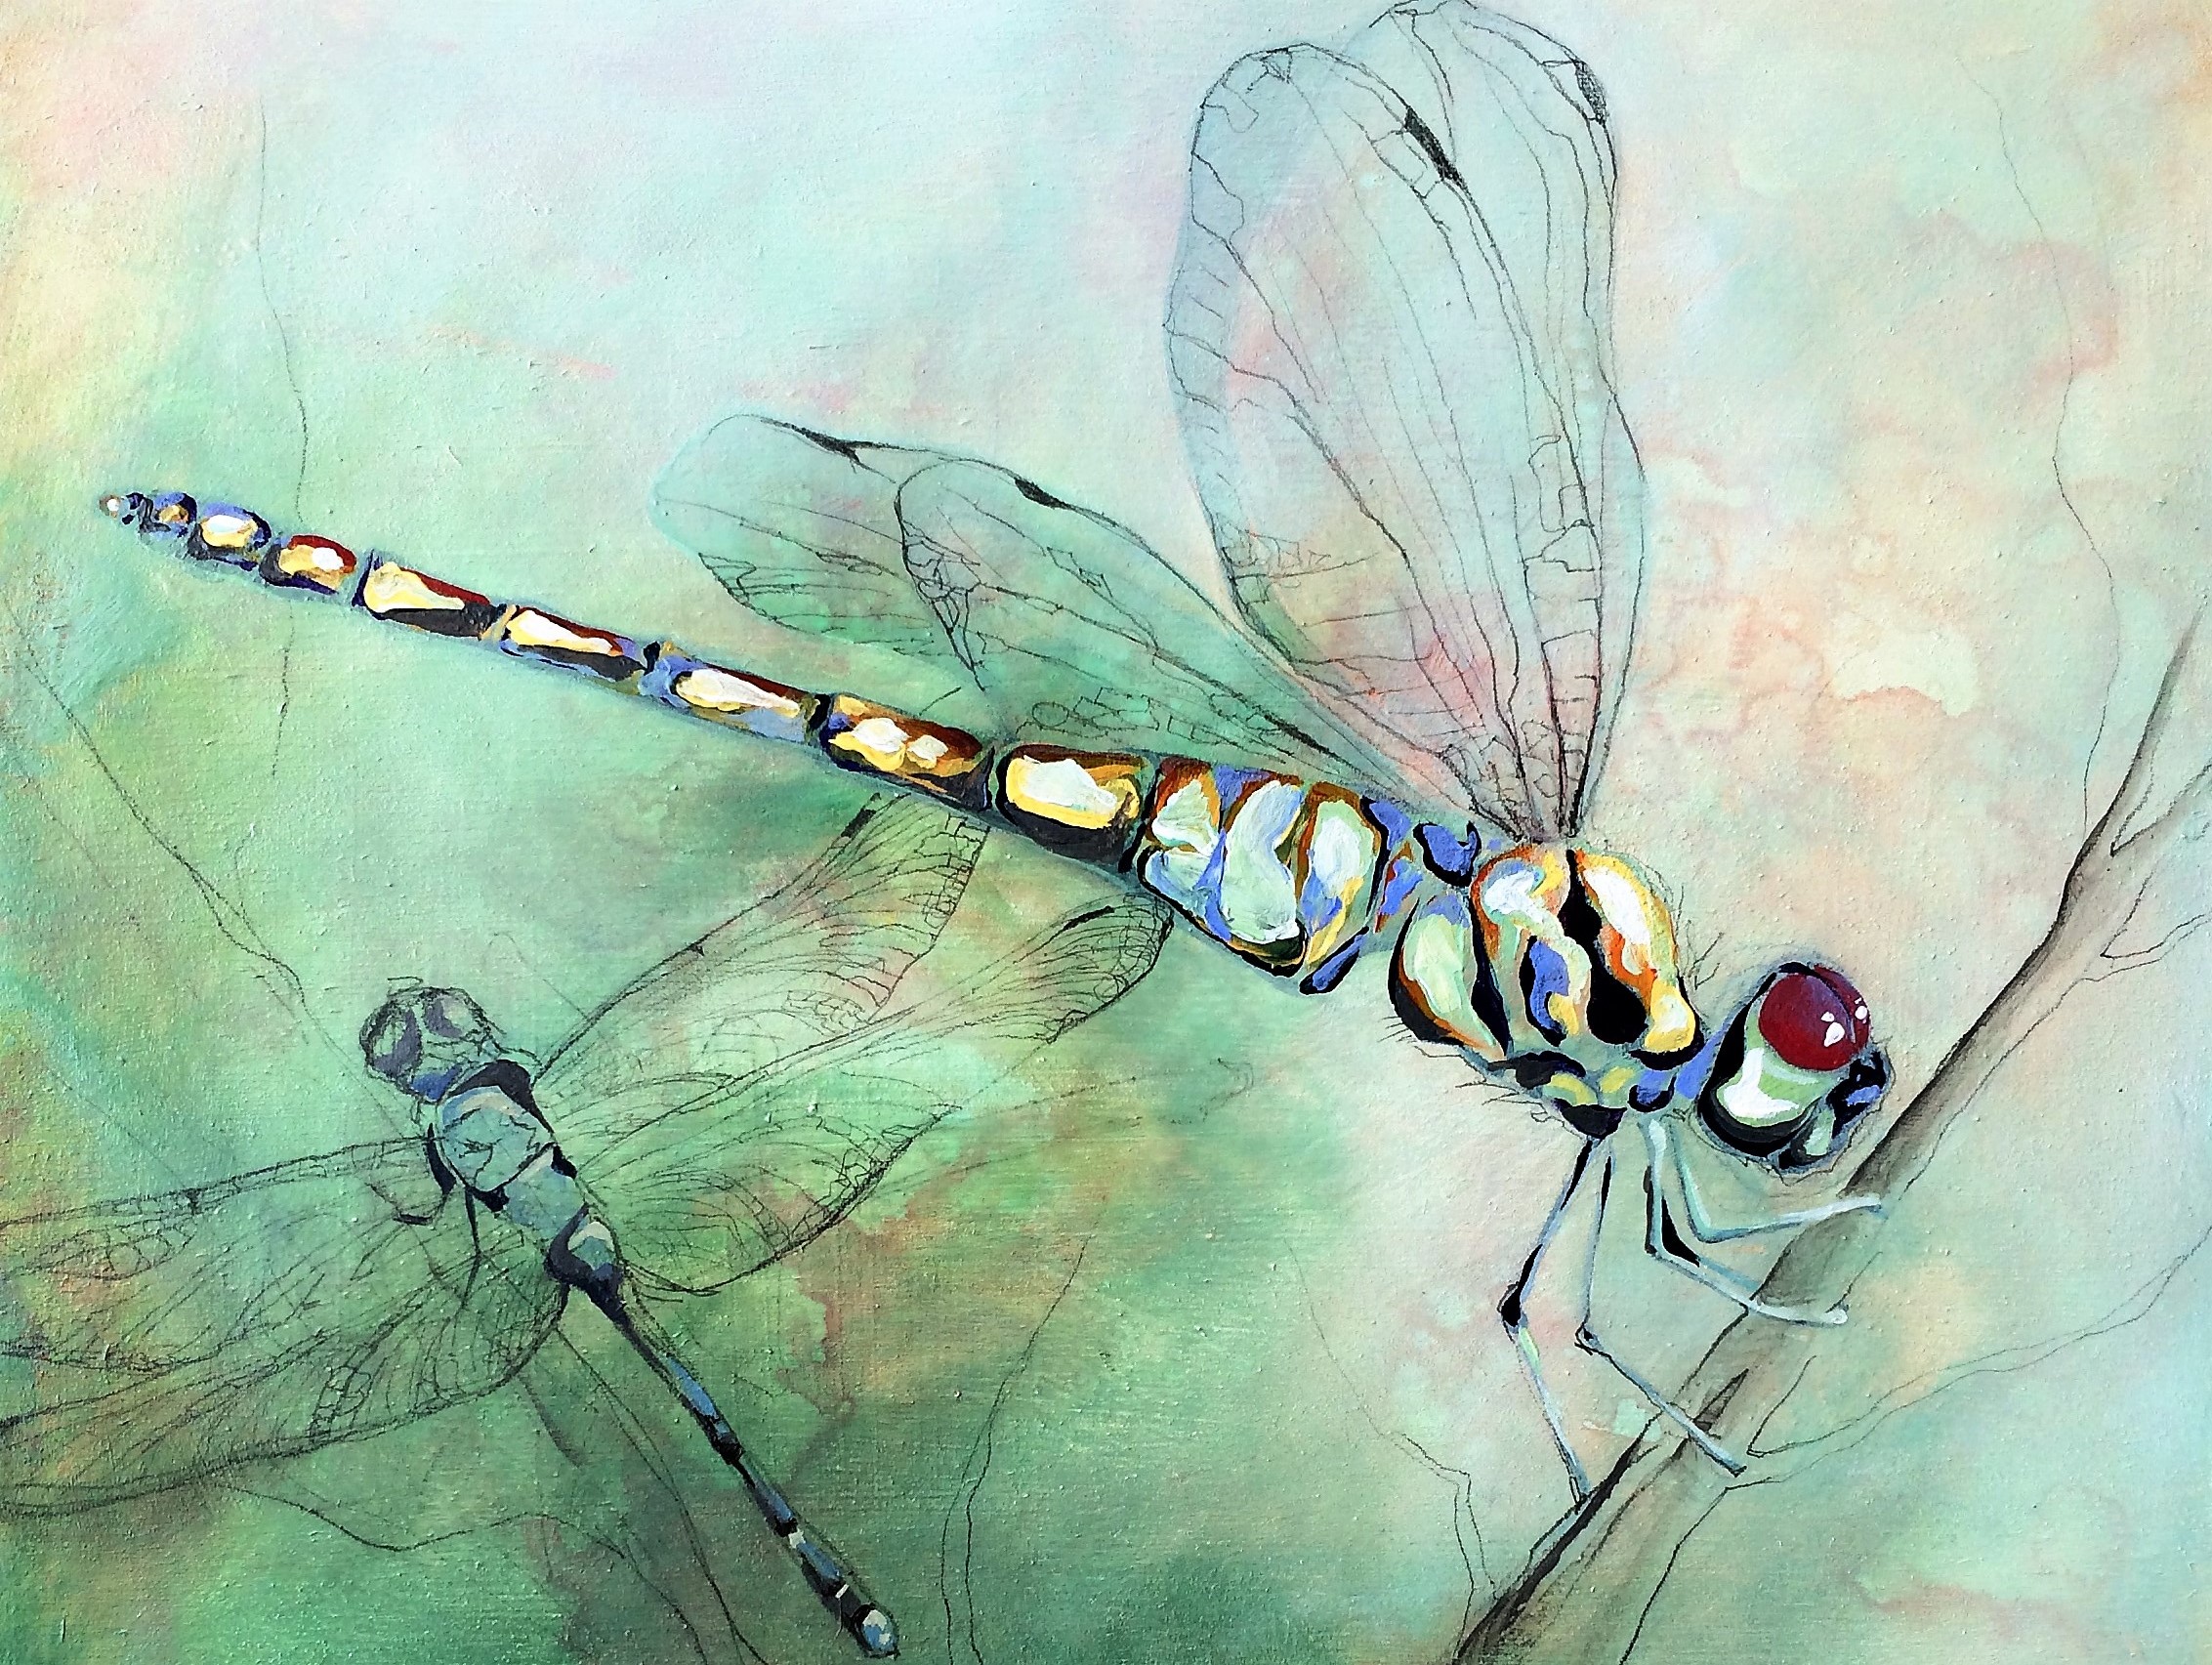 Two Dragonflies